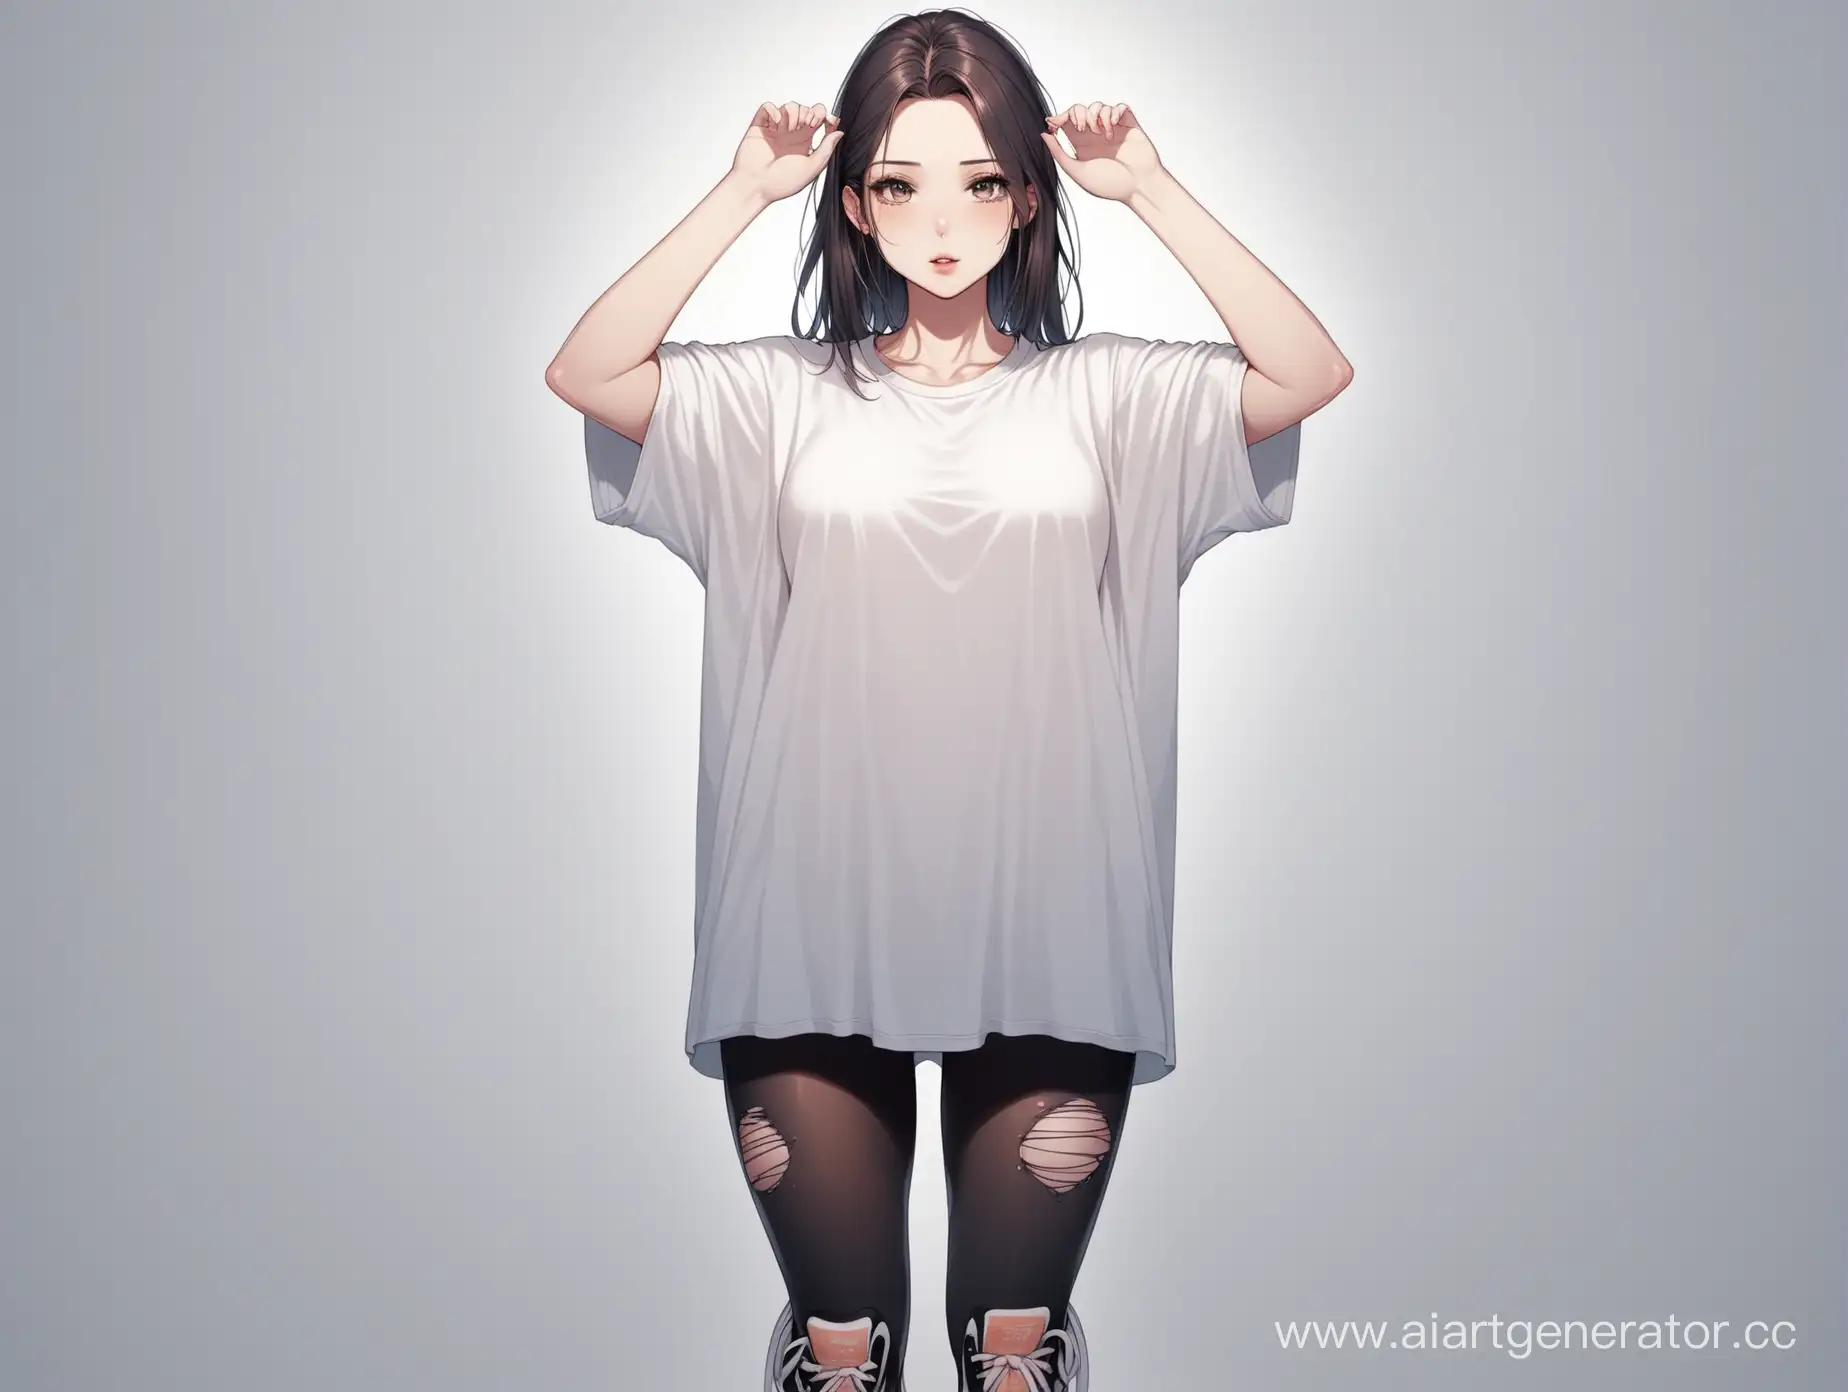 Beautiful-Girl-Reveals-Scary-Implants-Under-Oversize-TShirt-and-Sneakers